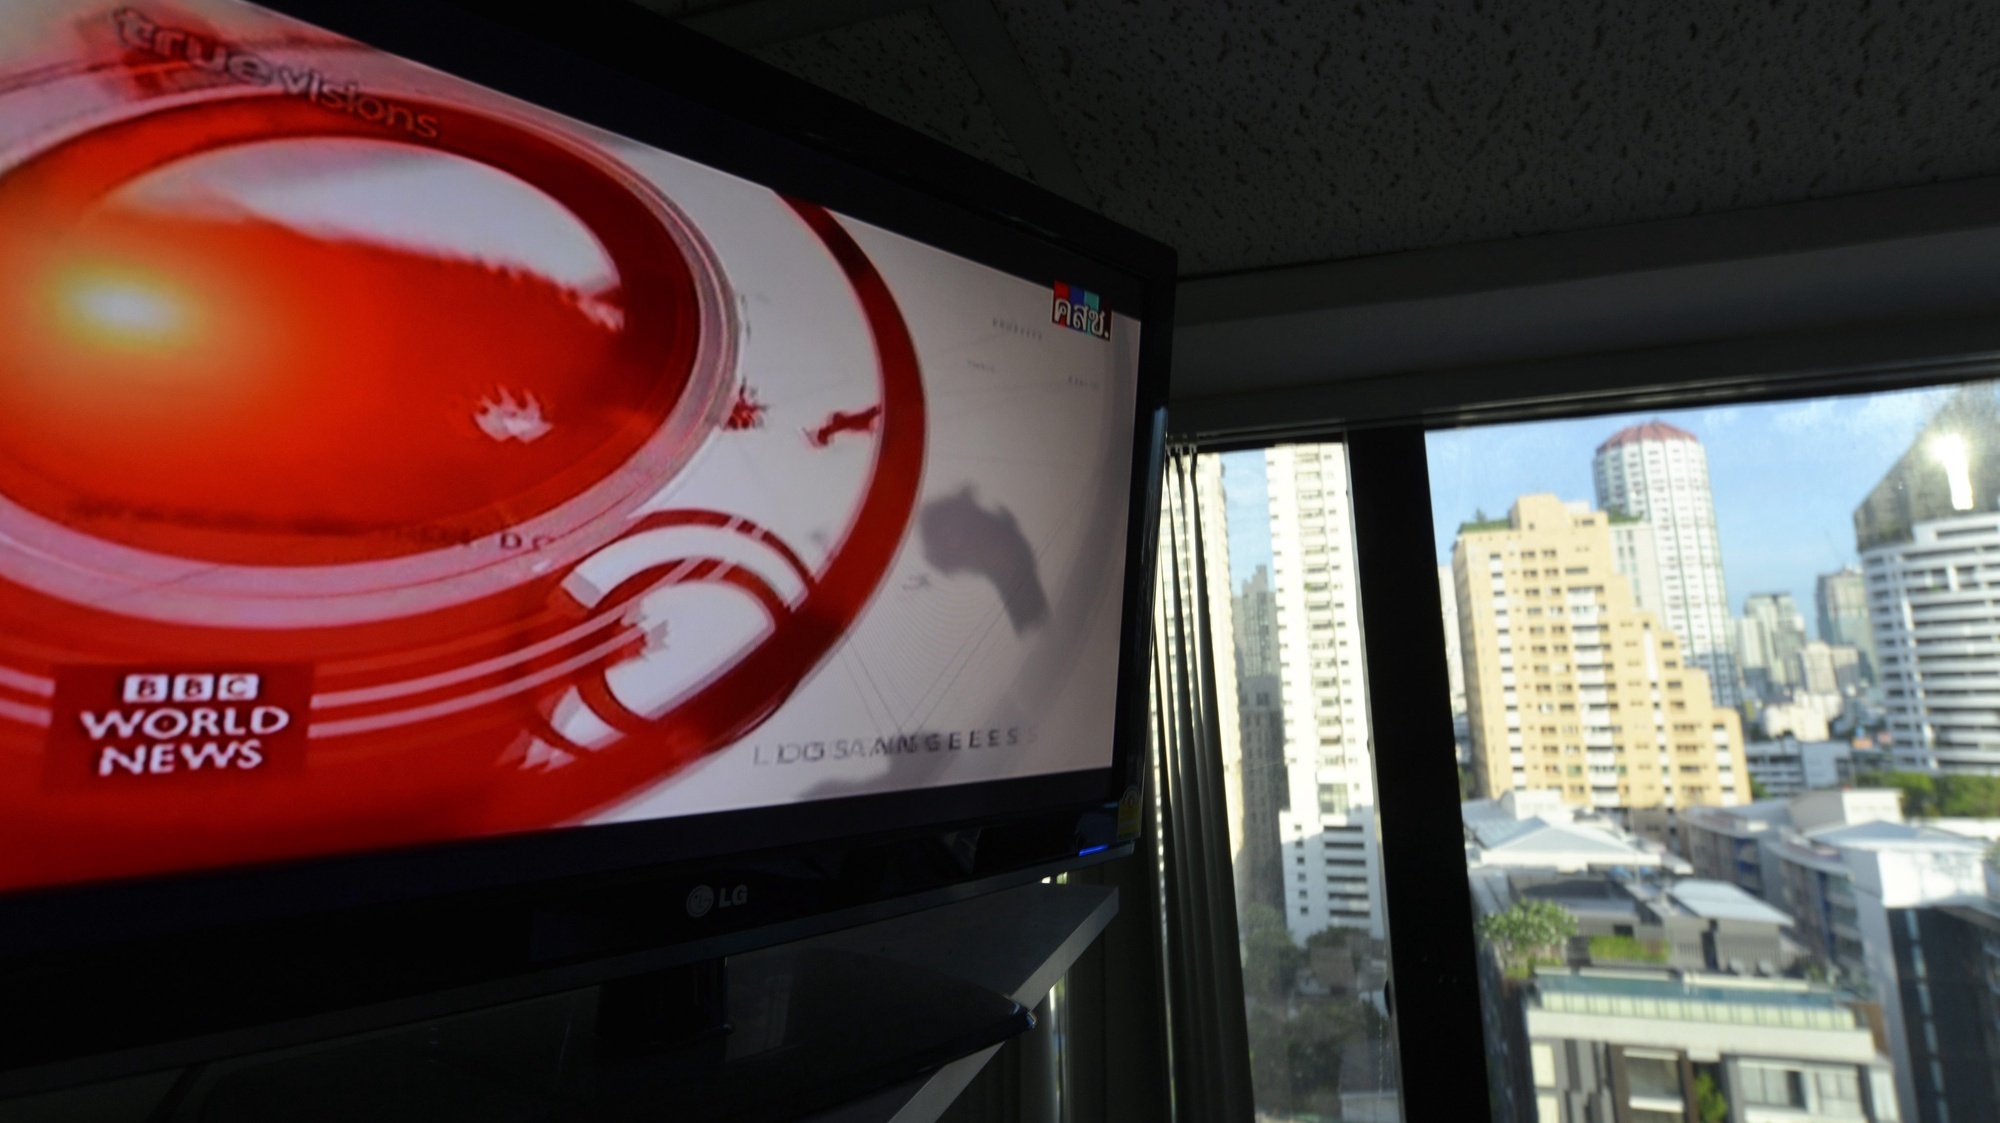 epa04237136 The logo of the BBC World News is seen on a TV screen in a high rise office building in Bangkok, Thailand, early 03 June 2014. The Thai military unblocked international TV news channels like BBC and CNN on 03 June after they were taken off the air in the country when the military took over power on 22 May. Royal Thai Army chief General Prayuth Chan-ocha seized power on 22 May, saying the coup was necessary to restore order after more than six months of street protests resulting in terrorist attacks and a political gridlock. On 30 May he vowed to appoint a prime minister once peace is restored, to enact political reforms and hold elections within about 14 months.  EPA/UDO WEITZ